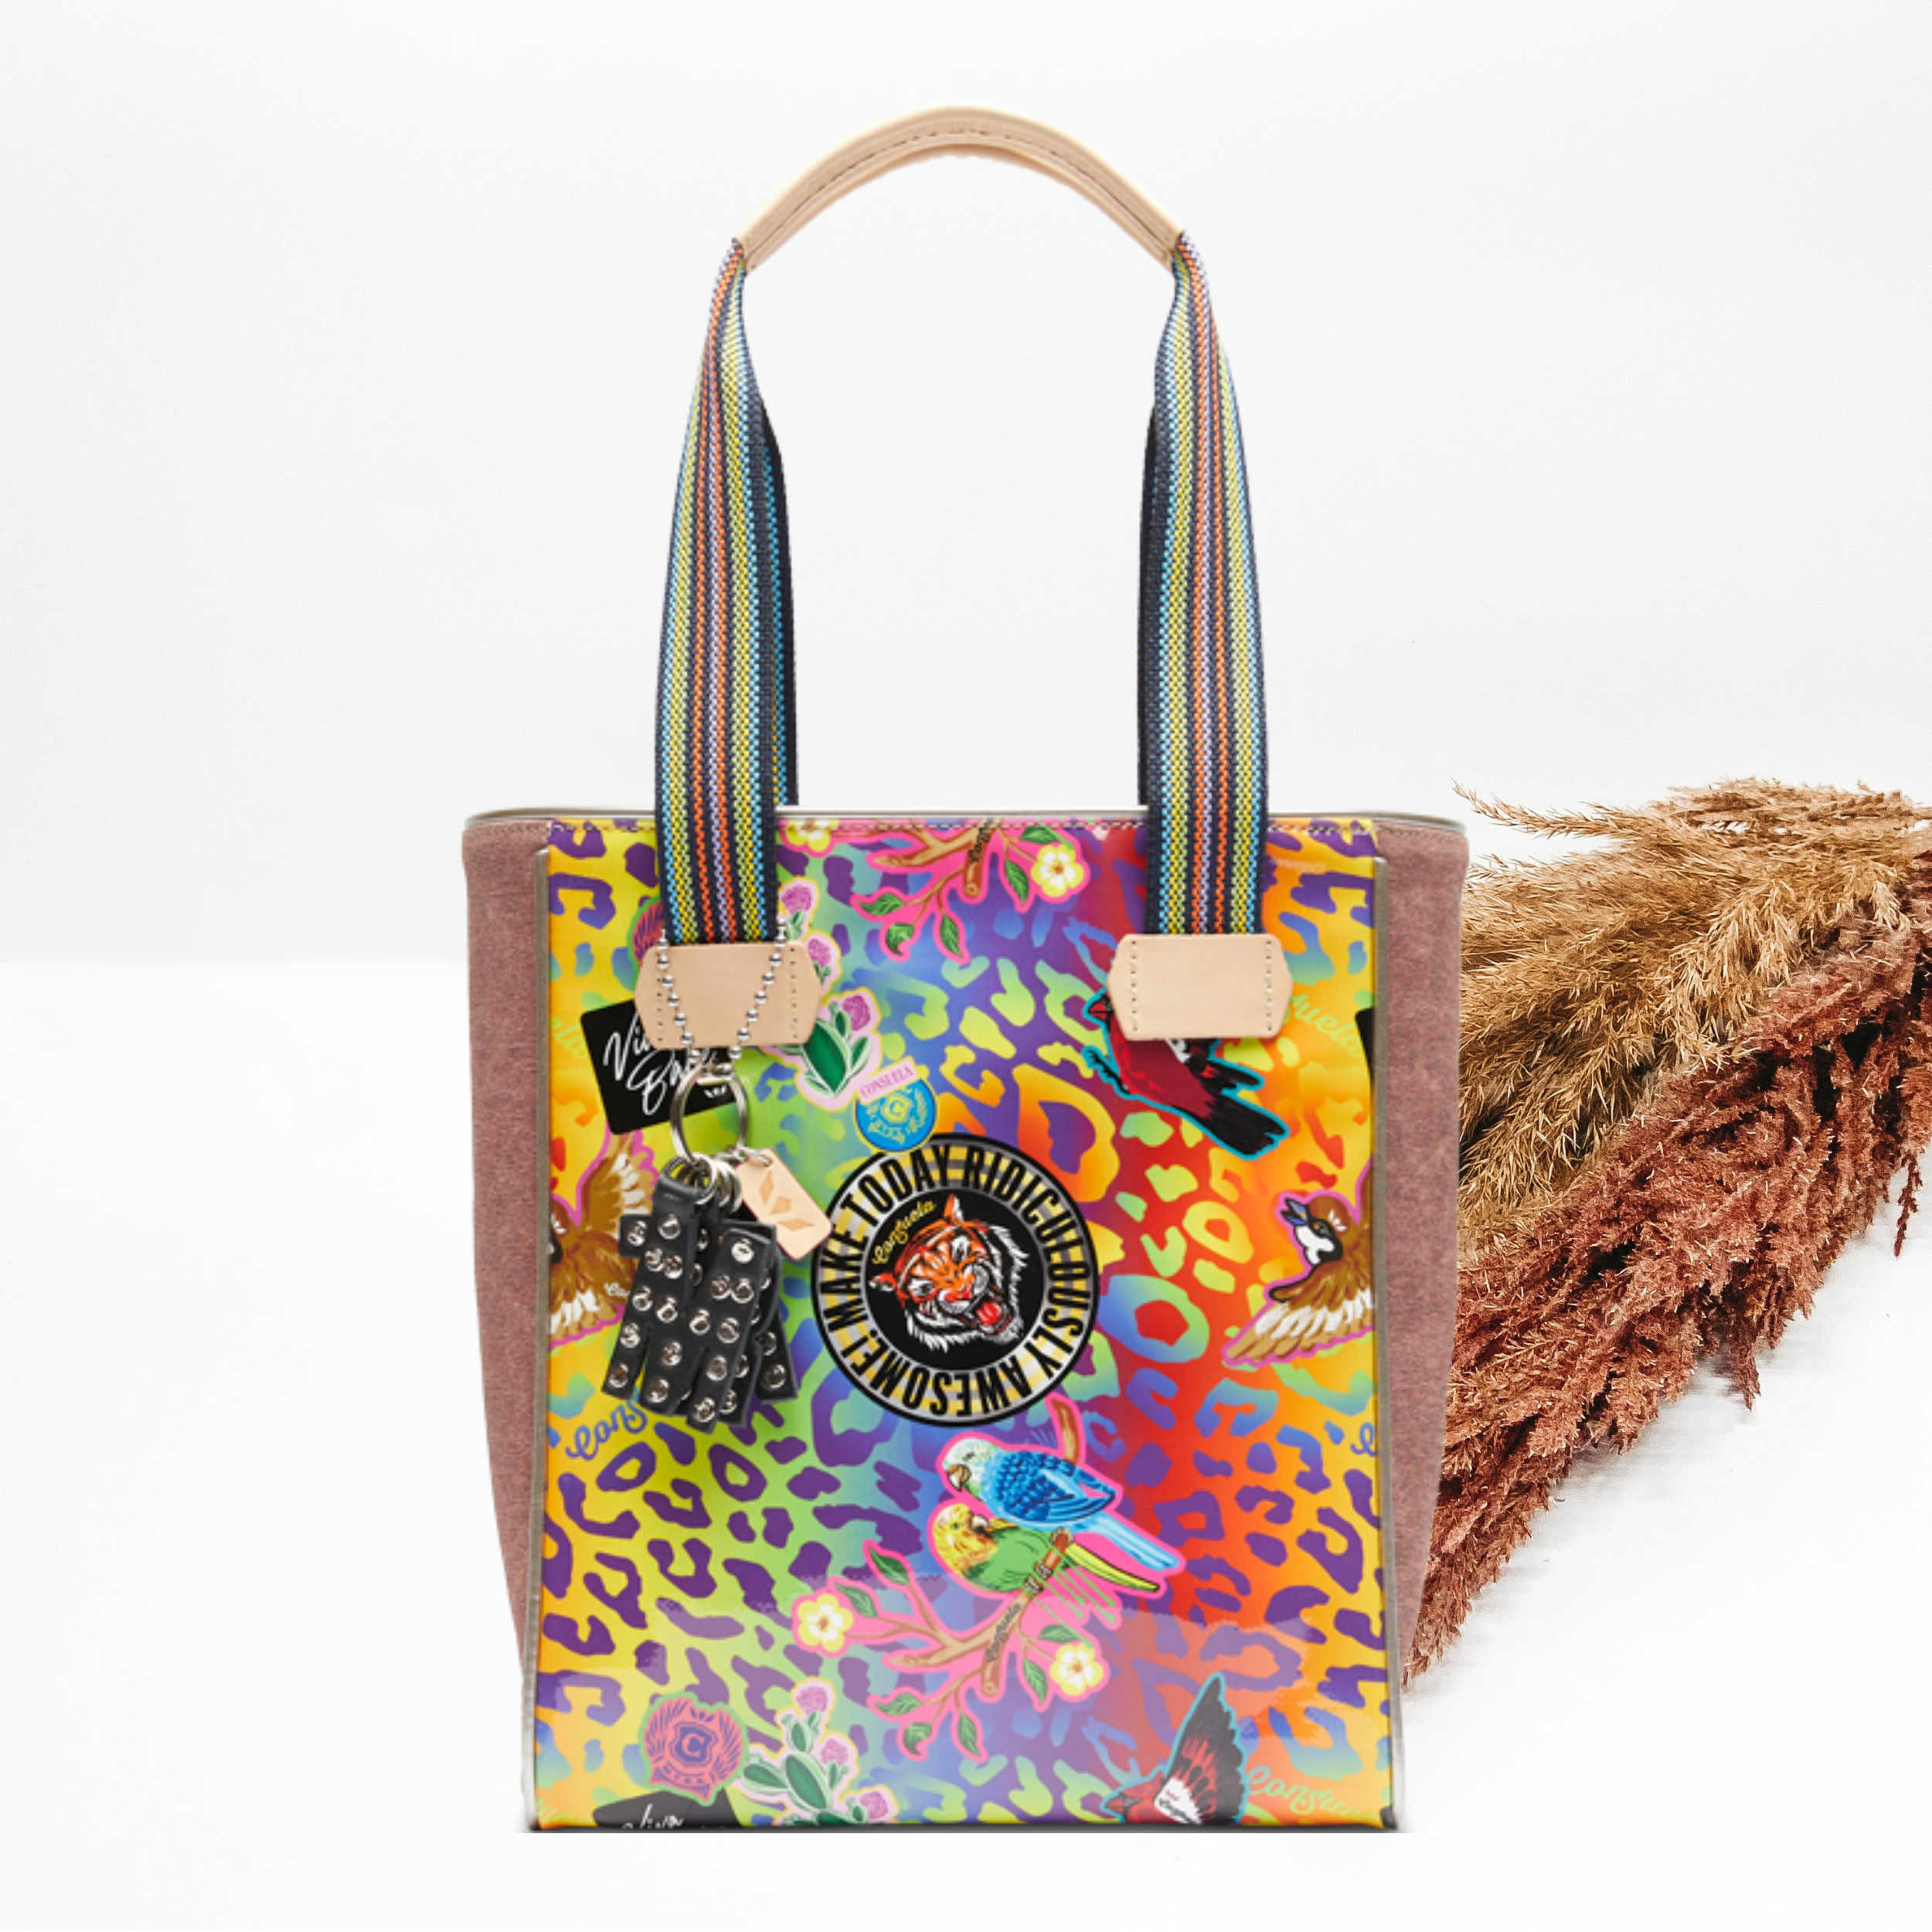 Pictured is a tote bag with striped straps and a black charm hanging on one of the straps. This tote has a multicolored leopard print design that includes different pictures randomly throughout and includes light mauve fabric sides. This tote is pictured on a white background with pompous grass on the right side of the picture.